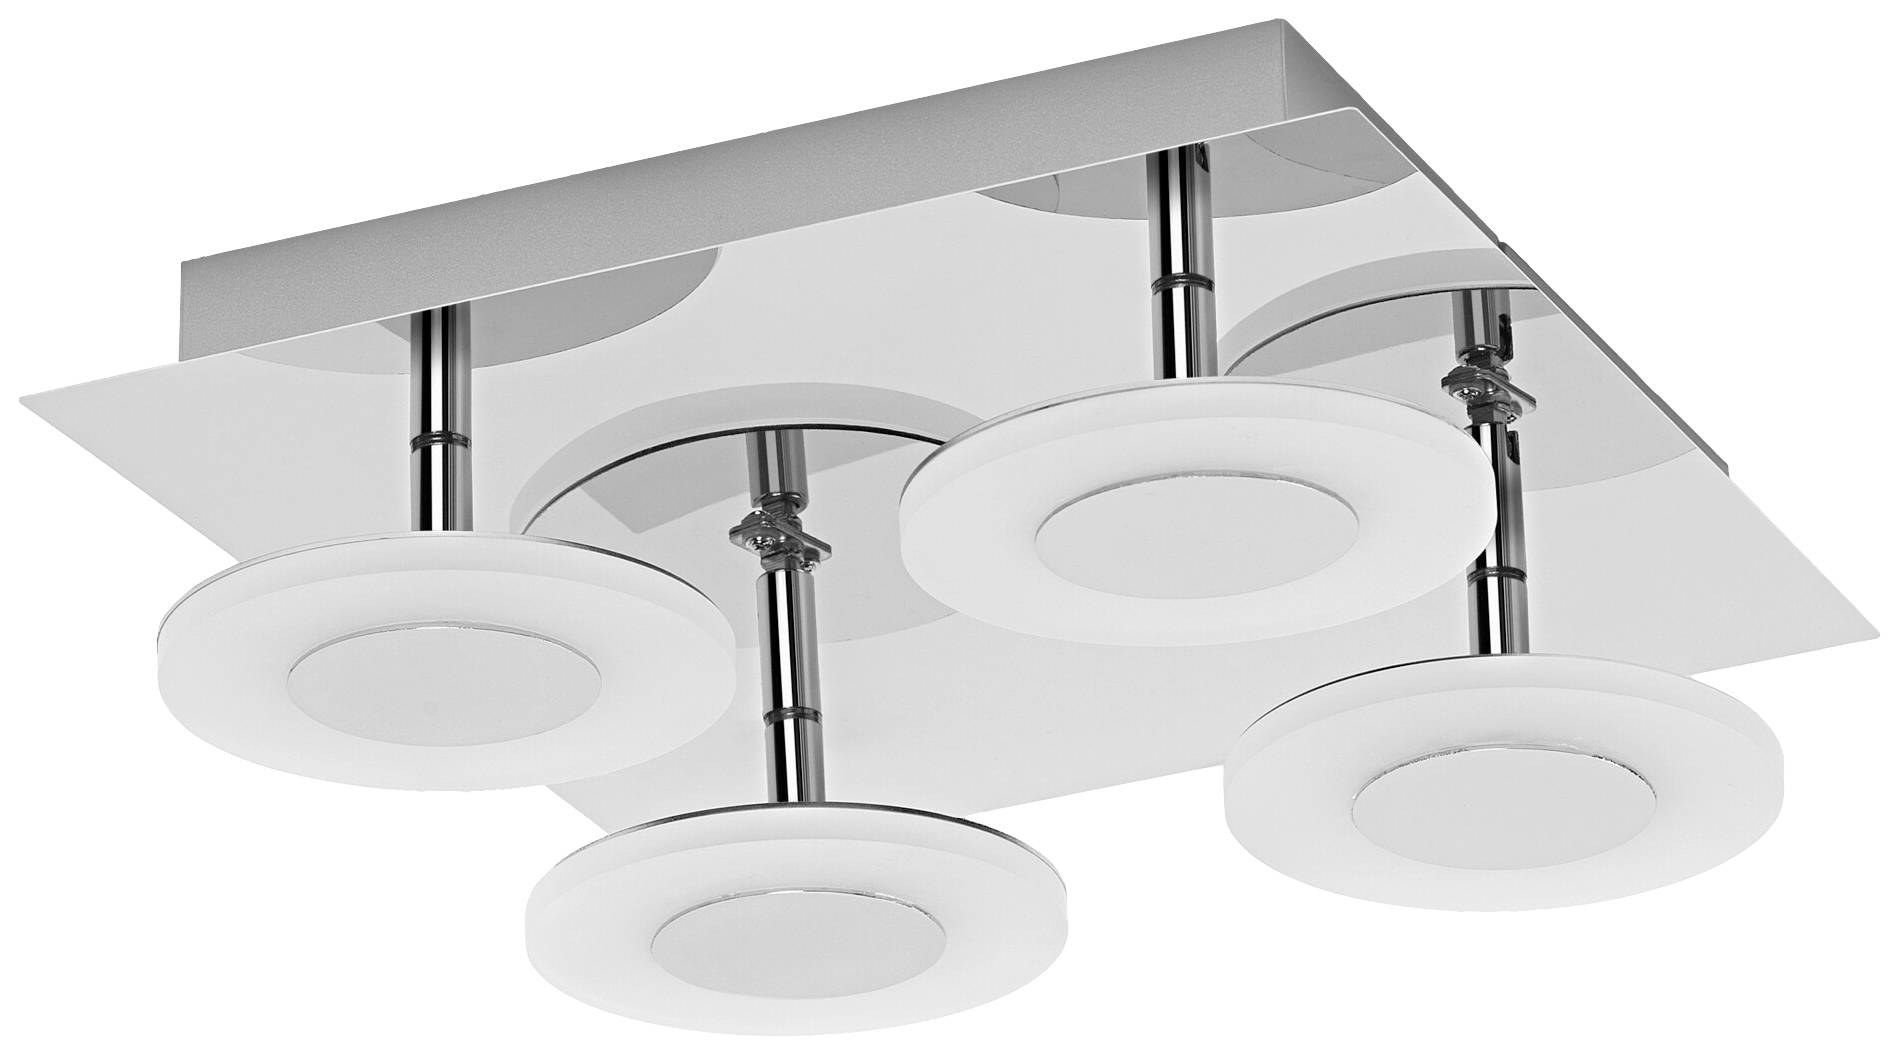 LEDVANCE BATHROOM DECORATIVE CEILING AND WALL WITH WIFI TECHNOLOGY 2 4058075573901 LED-Bad-Wand